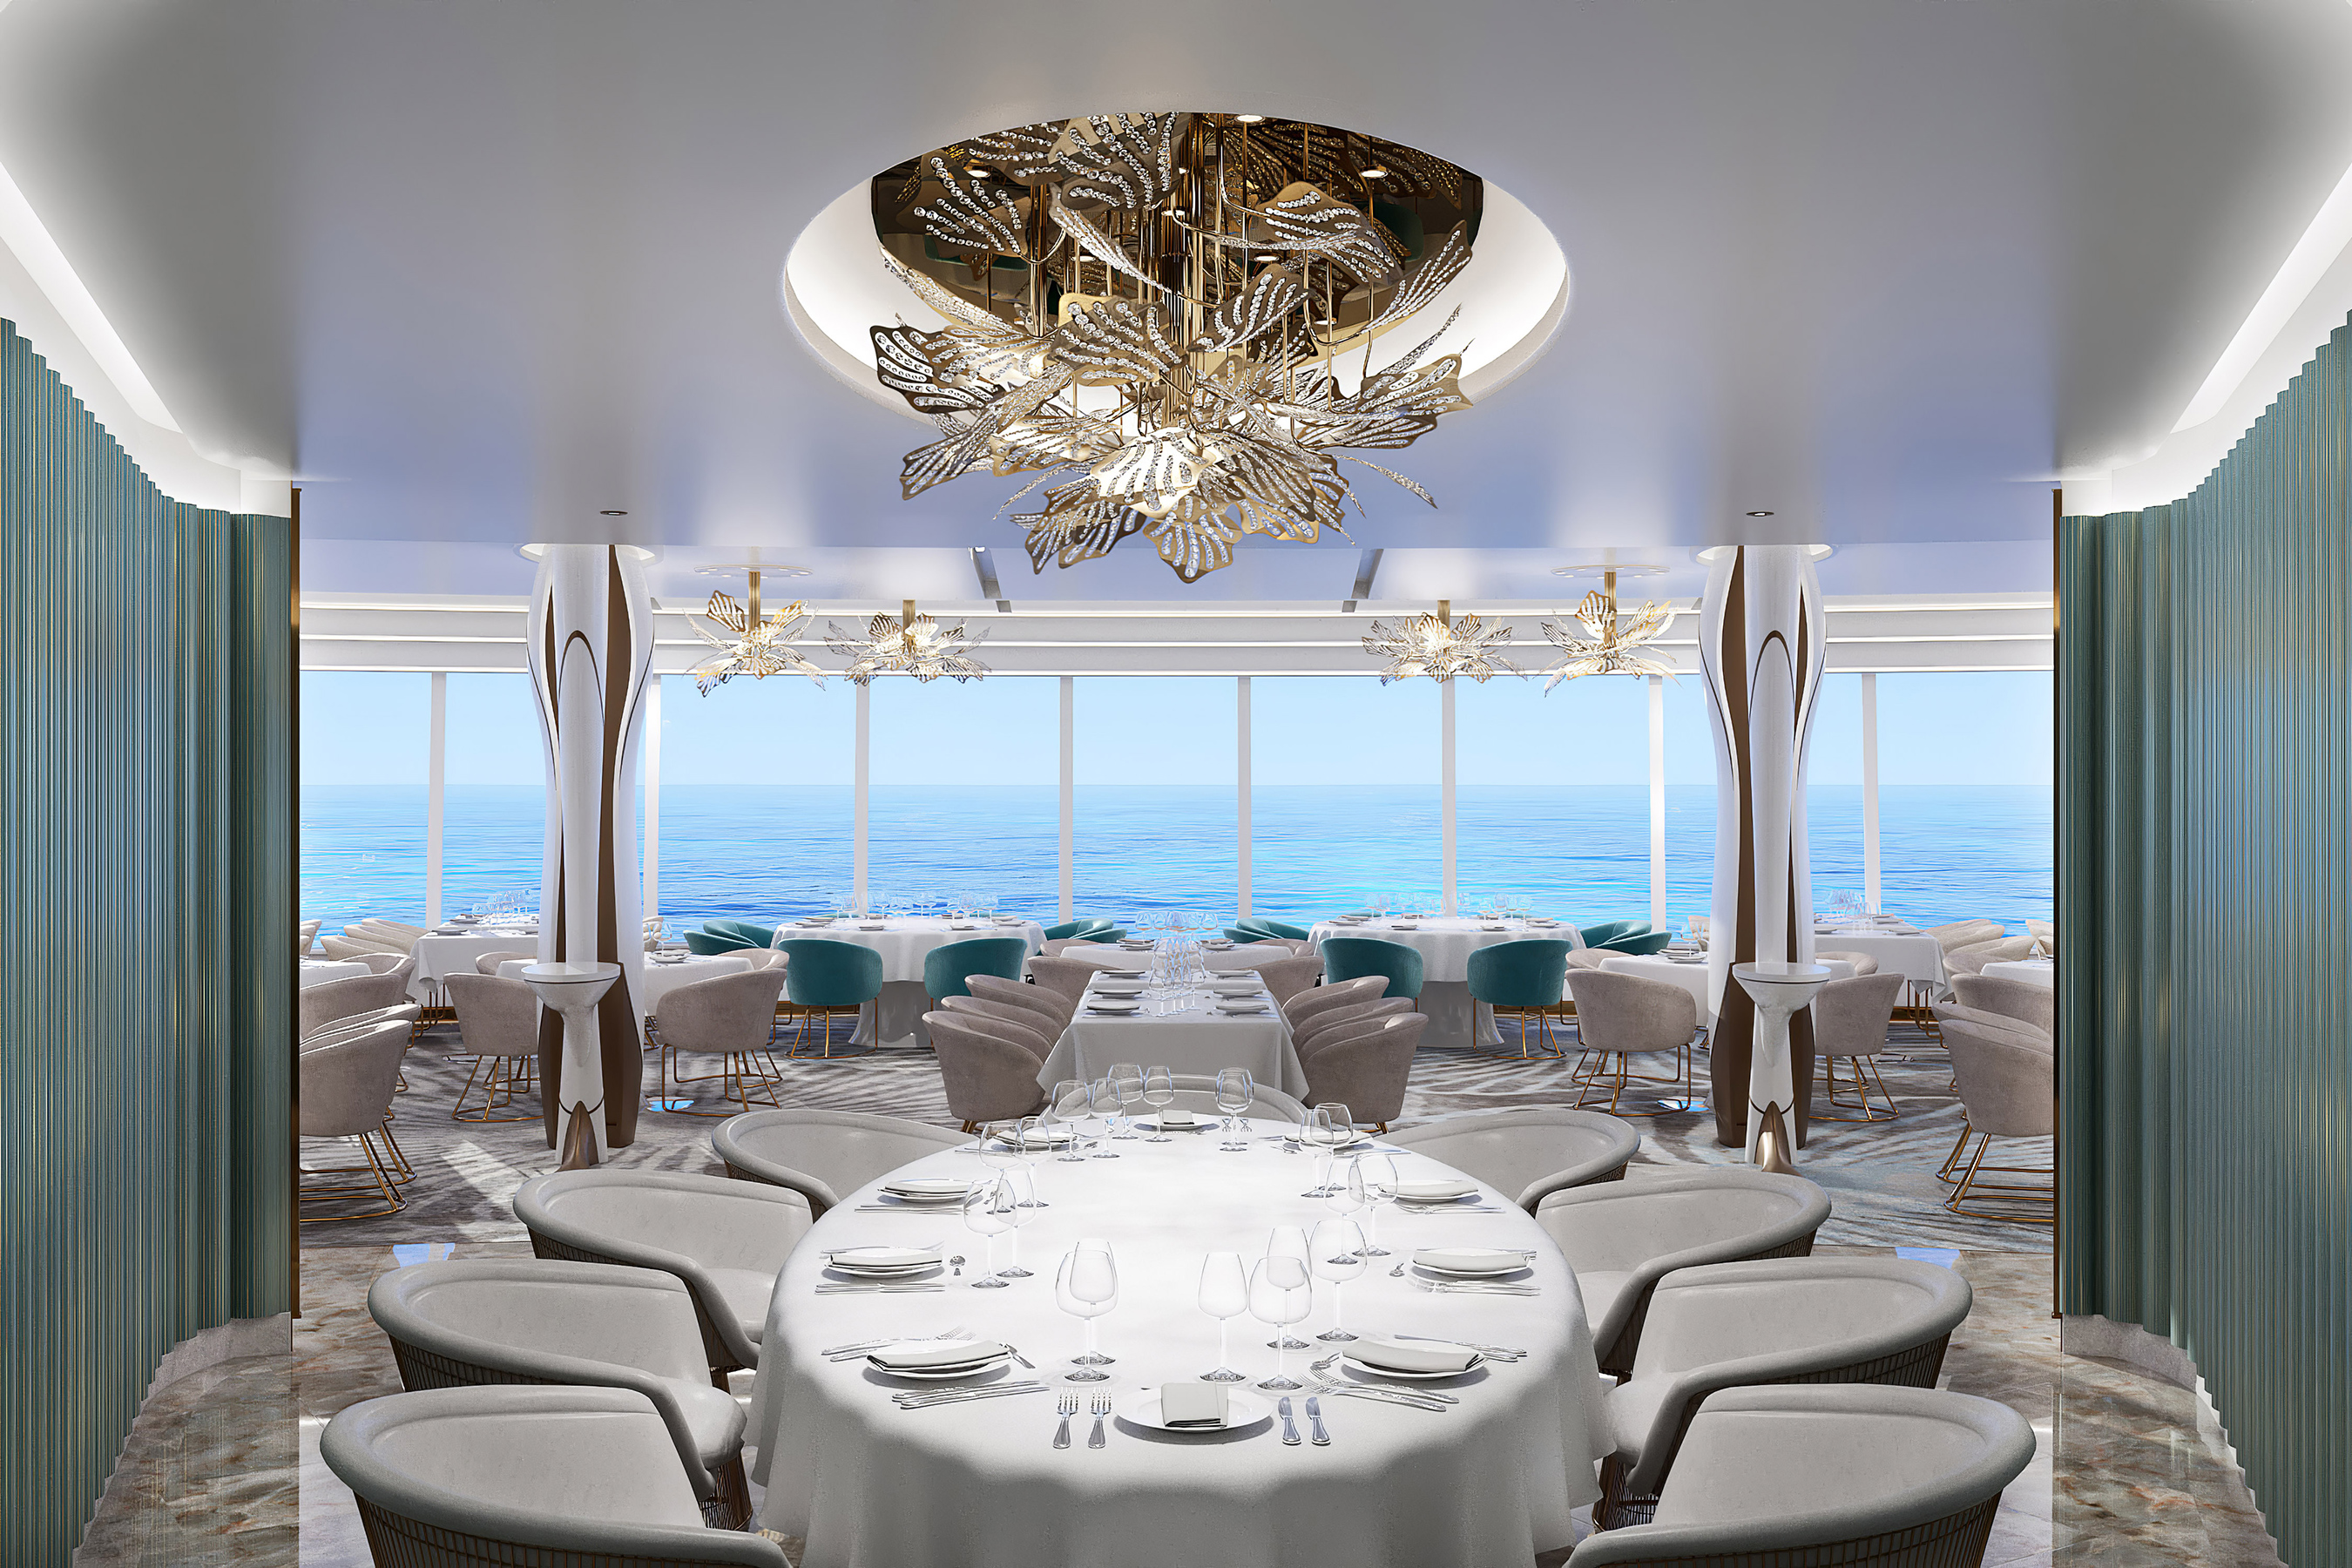 Norwegian Cruise Line’s new Prima Class ships, Norwegian Prima and Viva, will feature Hudson’s, the new main dining room located in the aft of the ship where guests will be able to take in stunning 270-degree views overlooking the stern, and sample mouthwatering menu items.